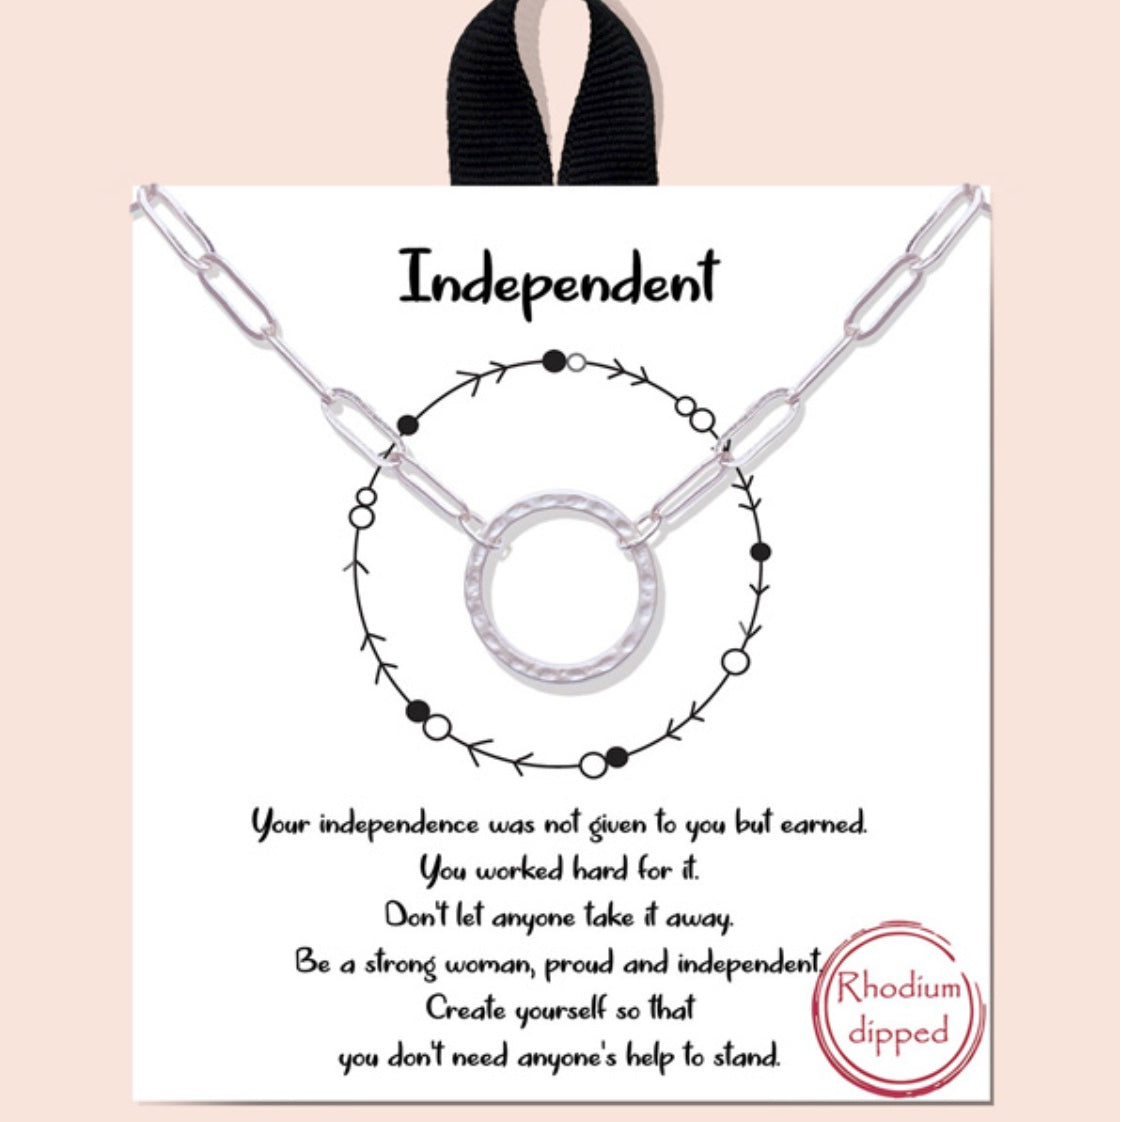 "INDEPENDENT" MAT SILVER ROUND CHAIN RHODIUM PLATED NECKLACE